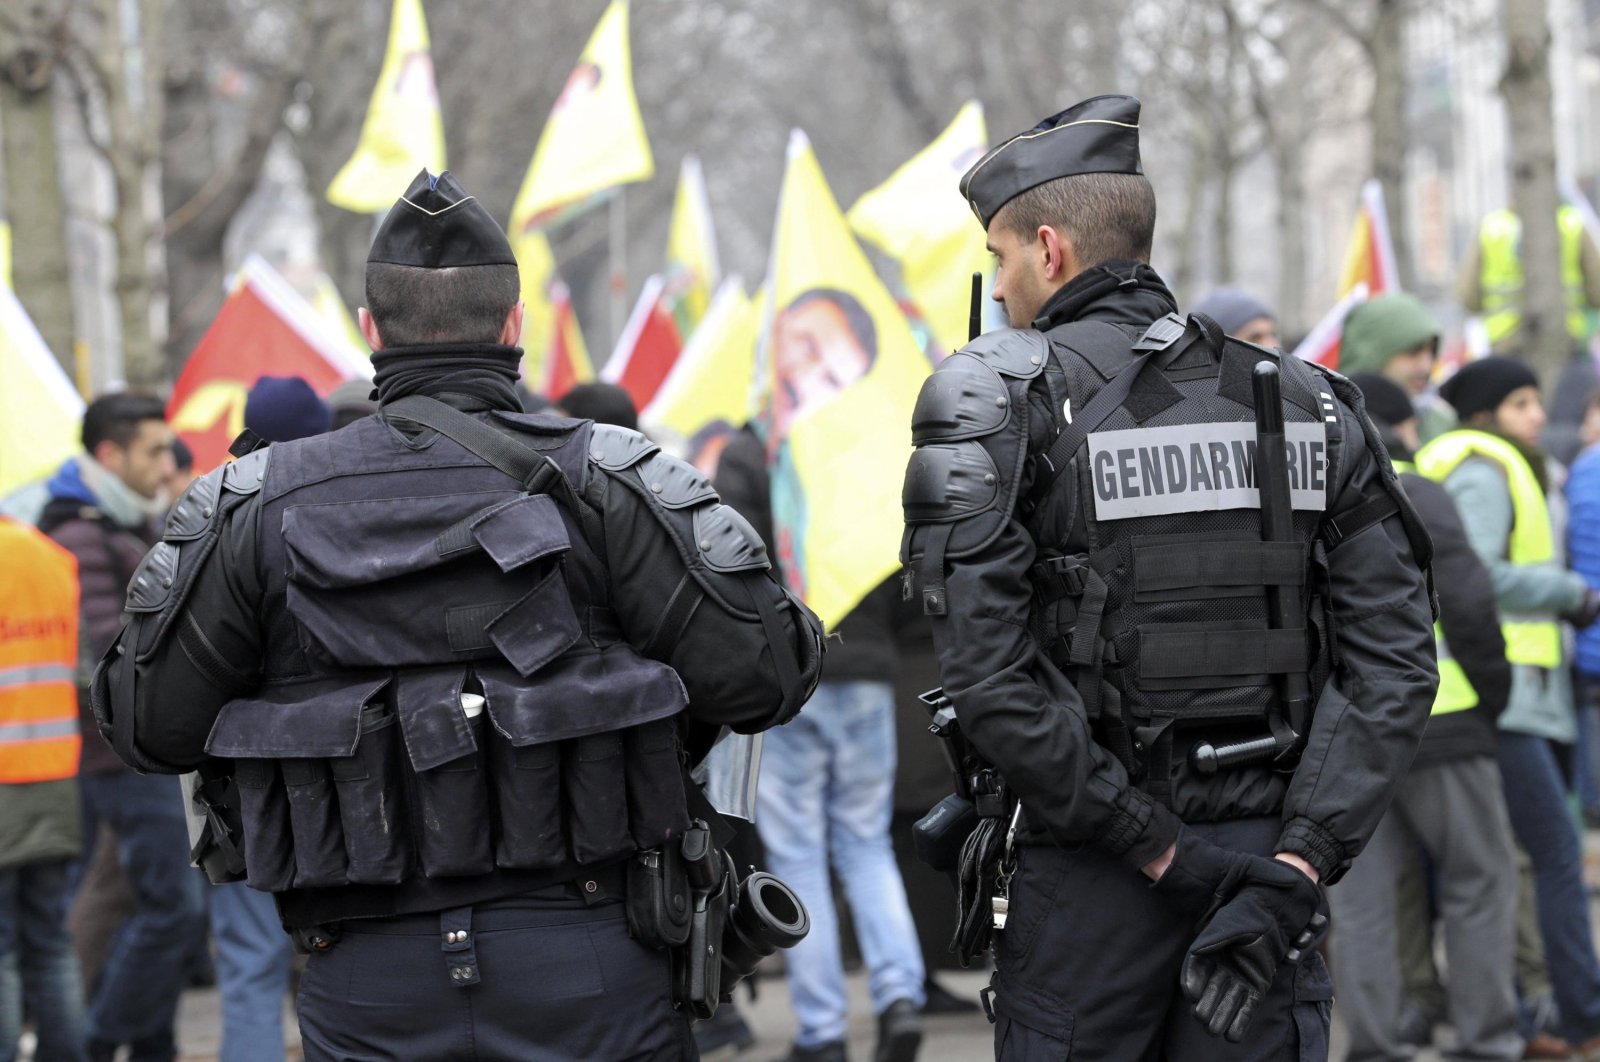 French gendarmes stand guard during a demonstration in support of jailed PKK terrorist group leader Abdullah Öcalan in Strasbourg, France, Feb. 11, 2017. (Reuters Photo)